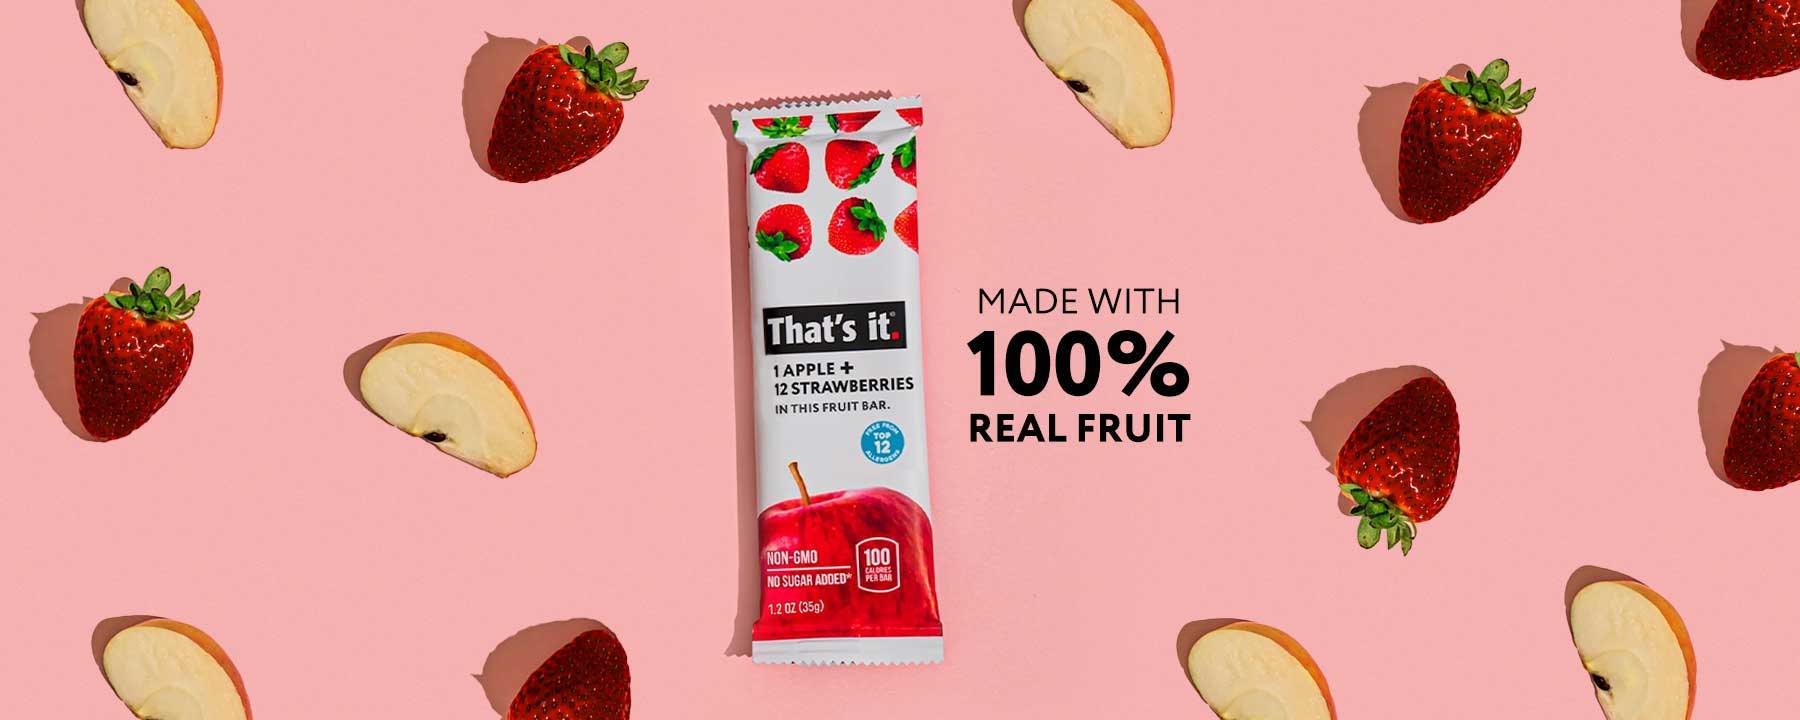 Made with 100% Real Fruit